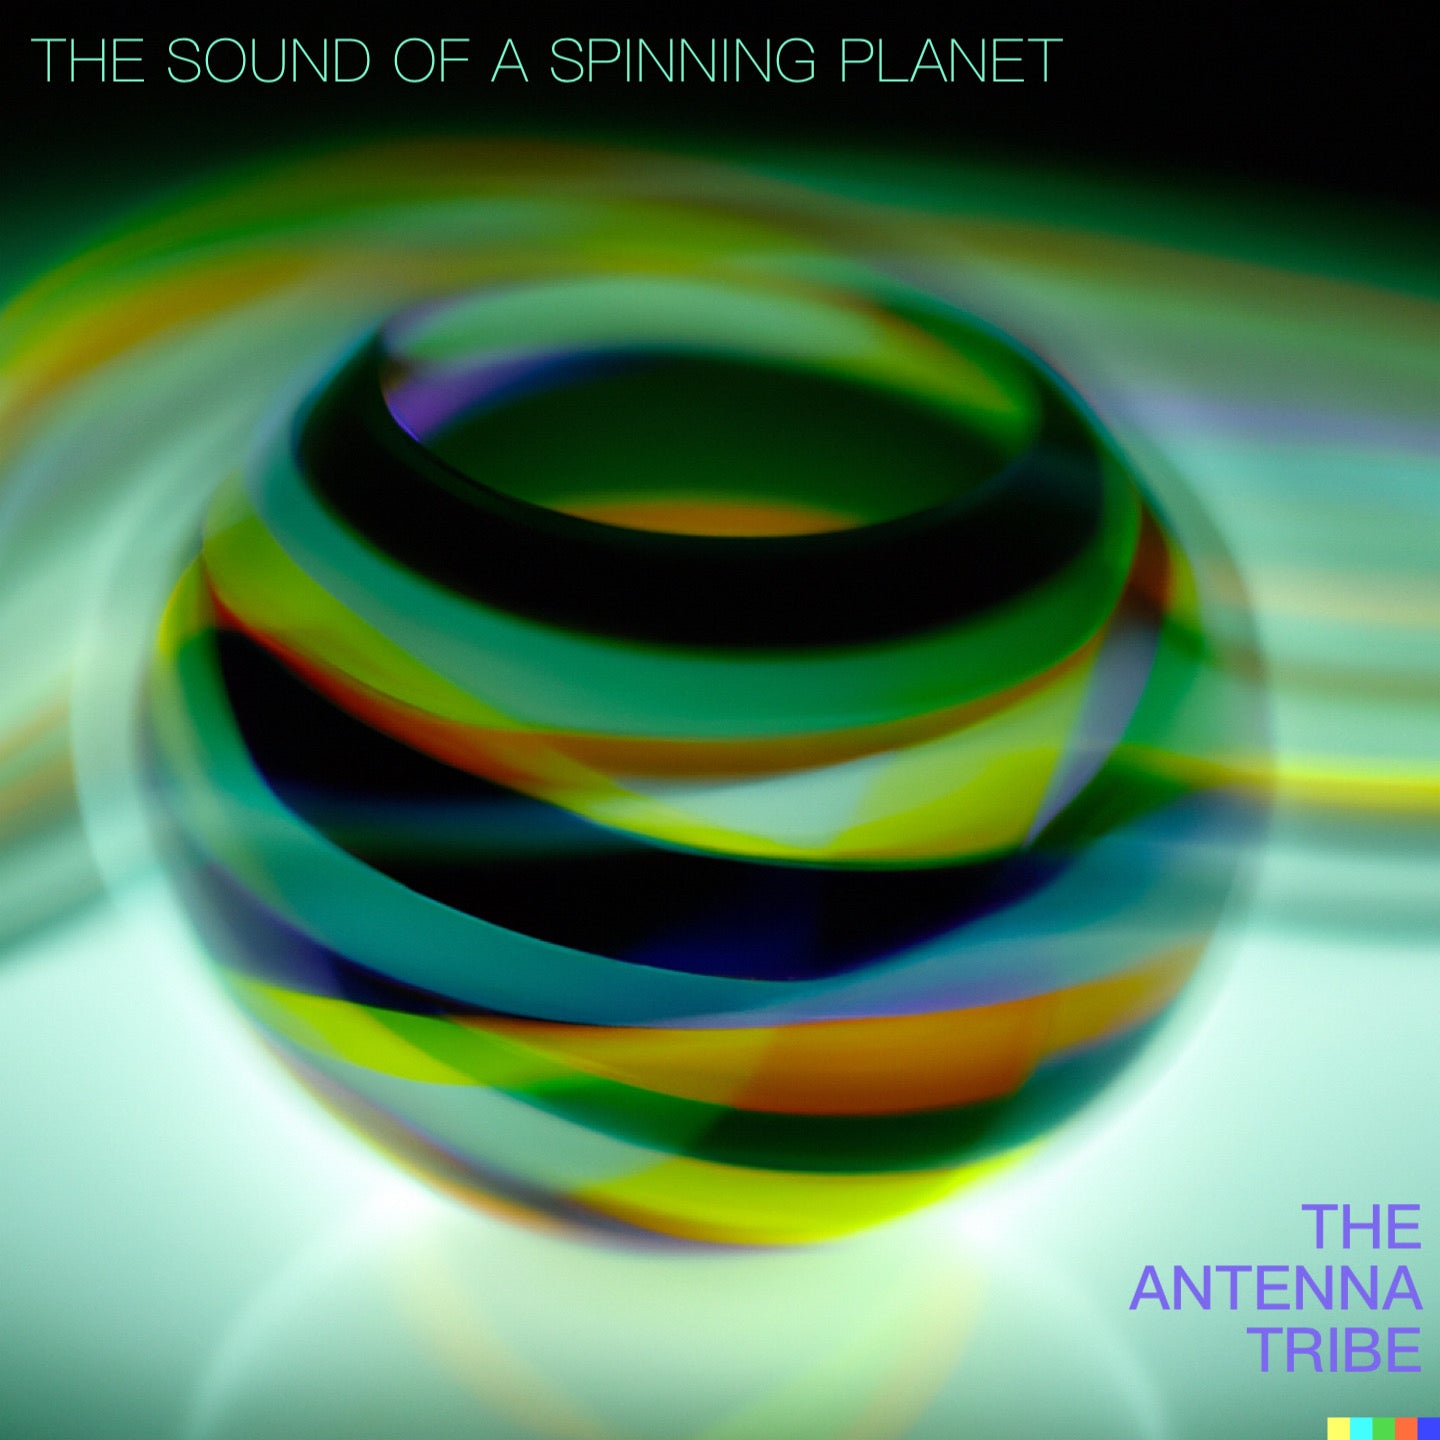 The Antenna Tribe – ‘The Sound Of A Spinning Planet’